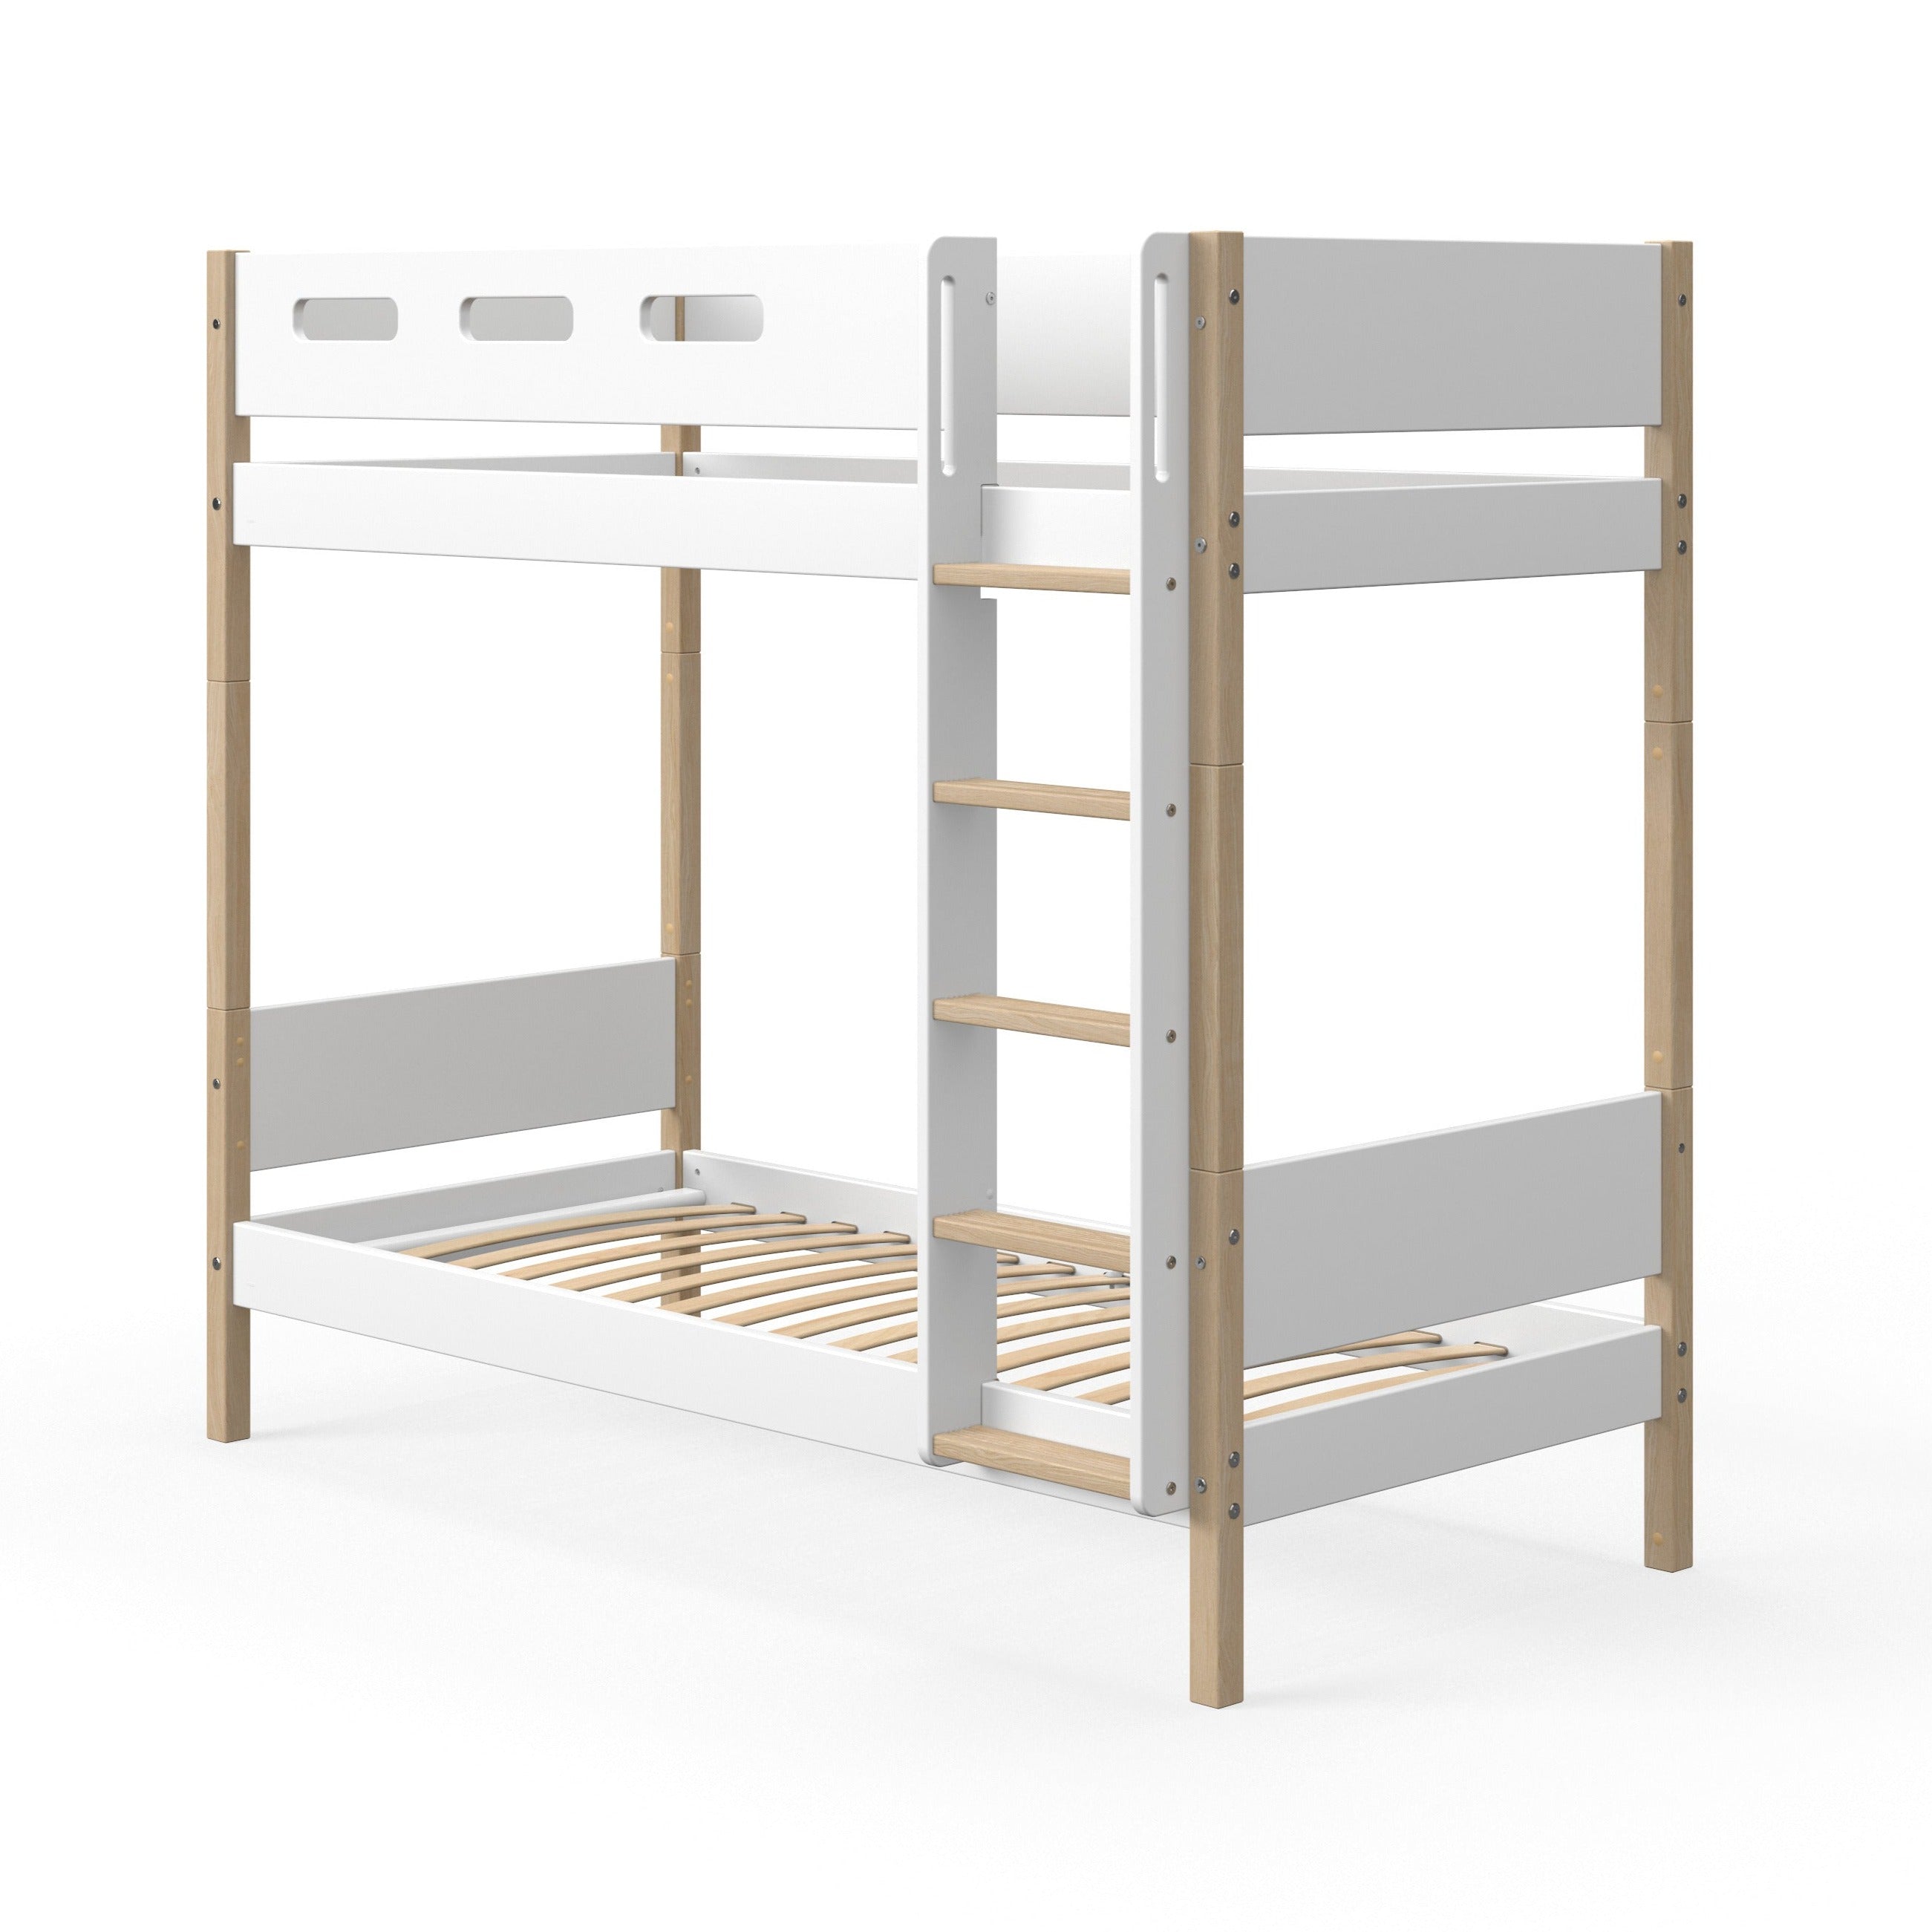 Flexa Nor Bunk Bed with Extra Height White & Oak